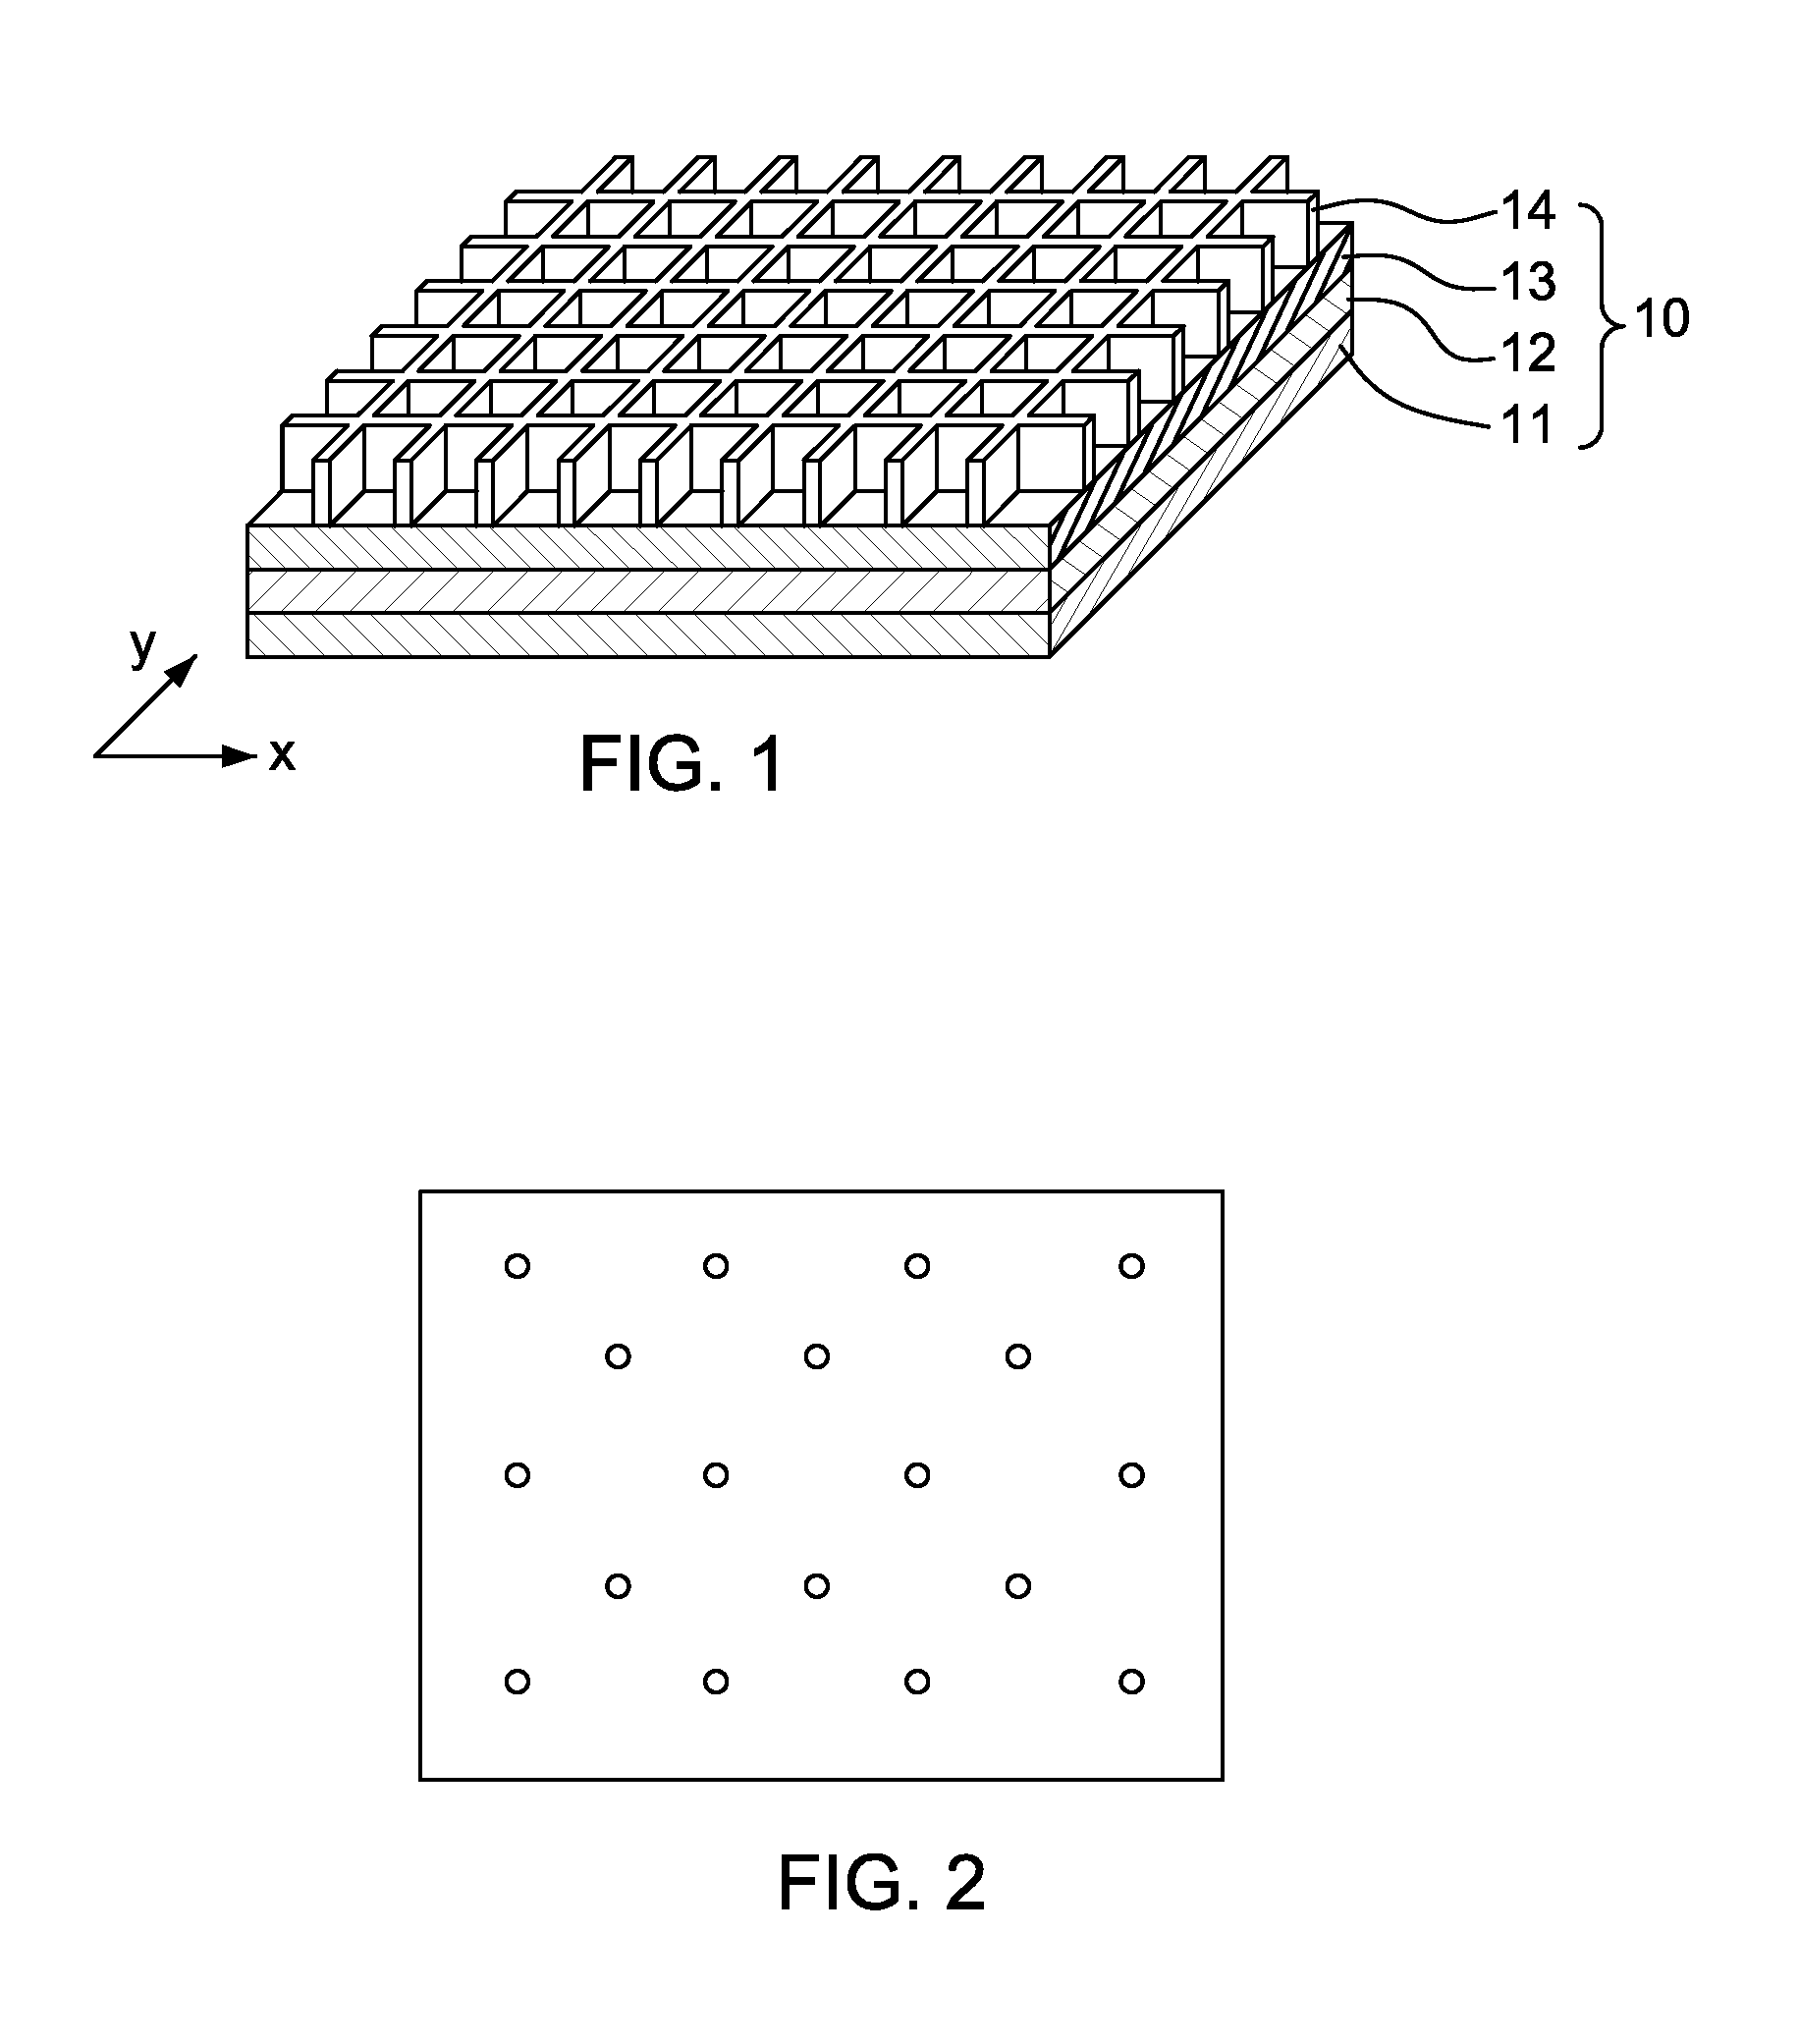 Process for making partially transparent photovoltaic modules